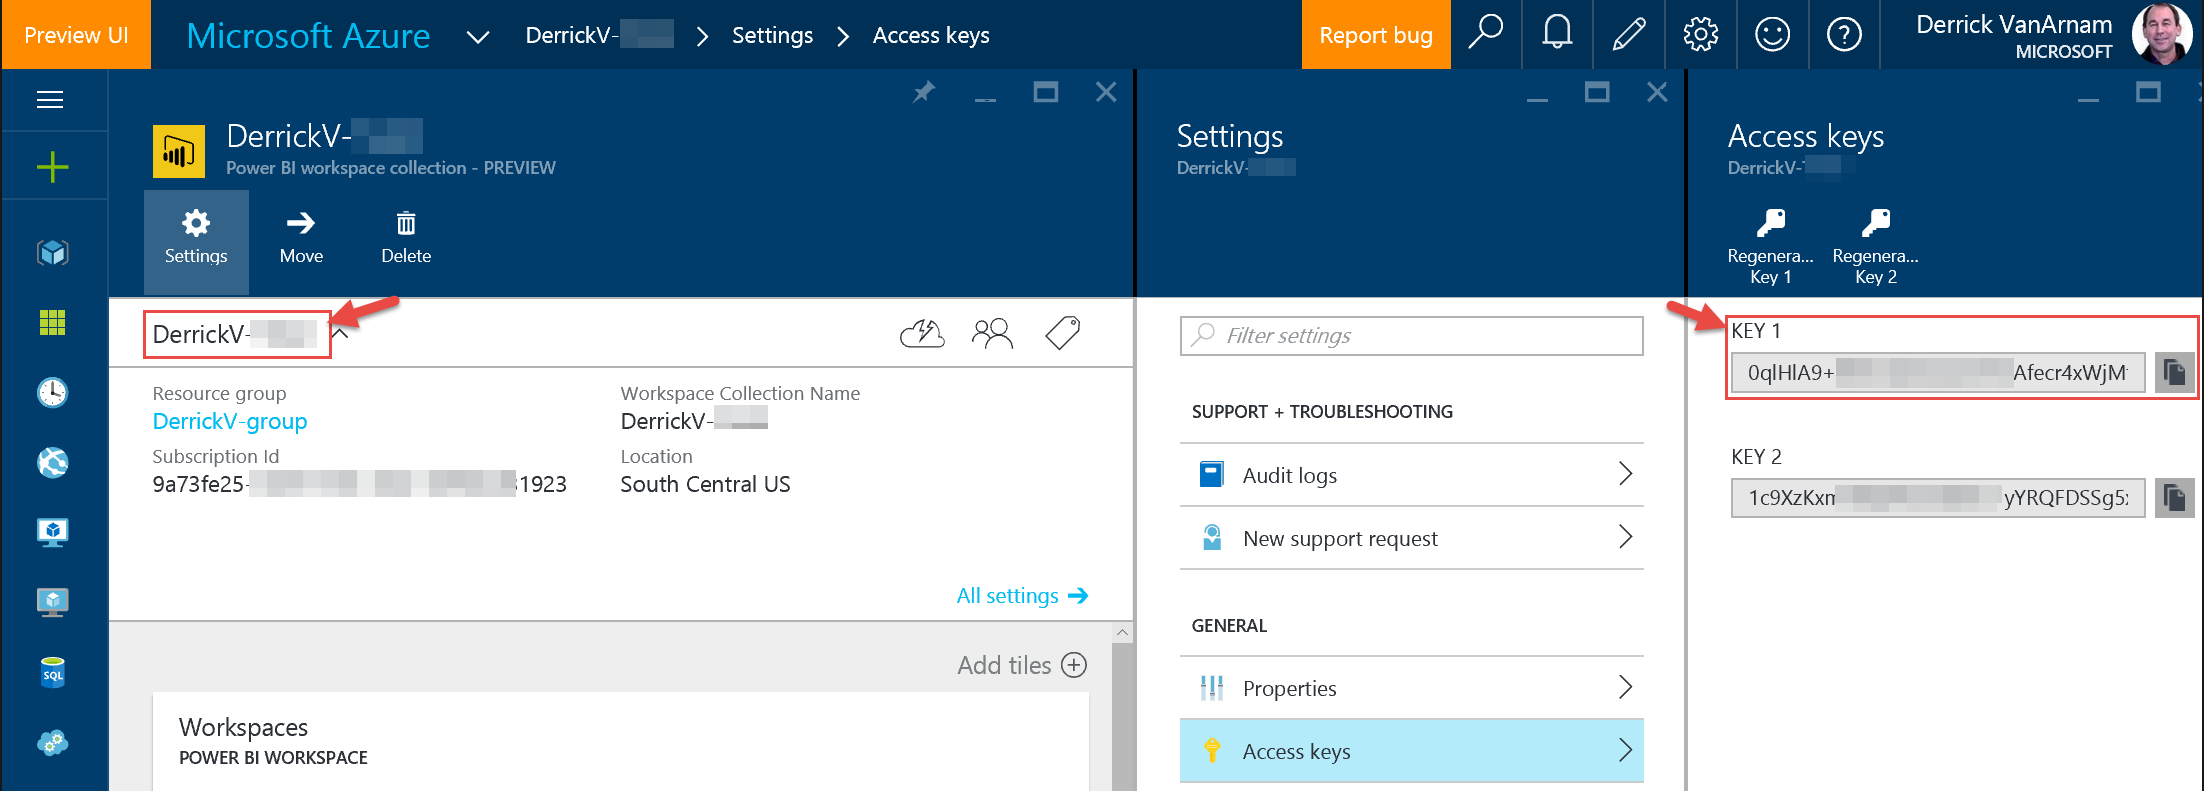 Where to find the API keys in the Azure portal